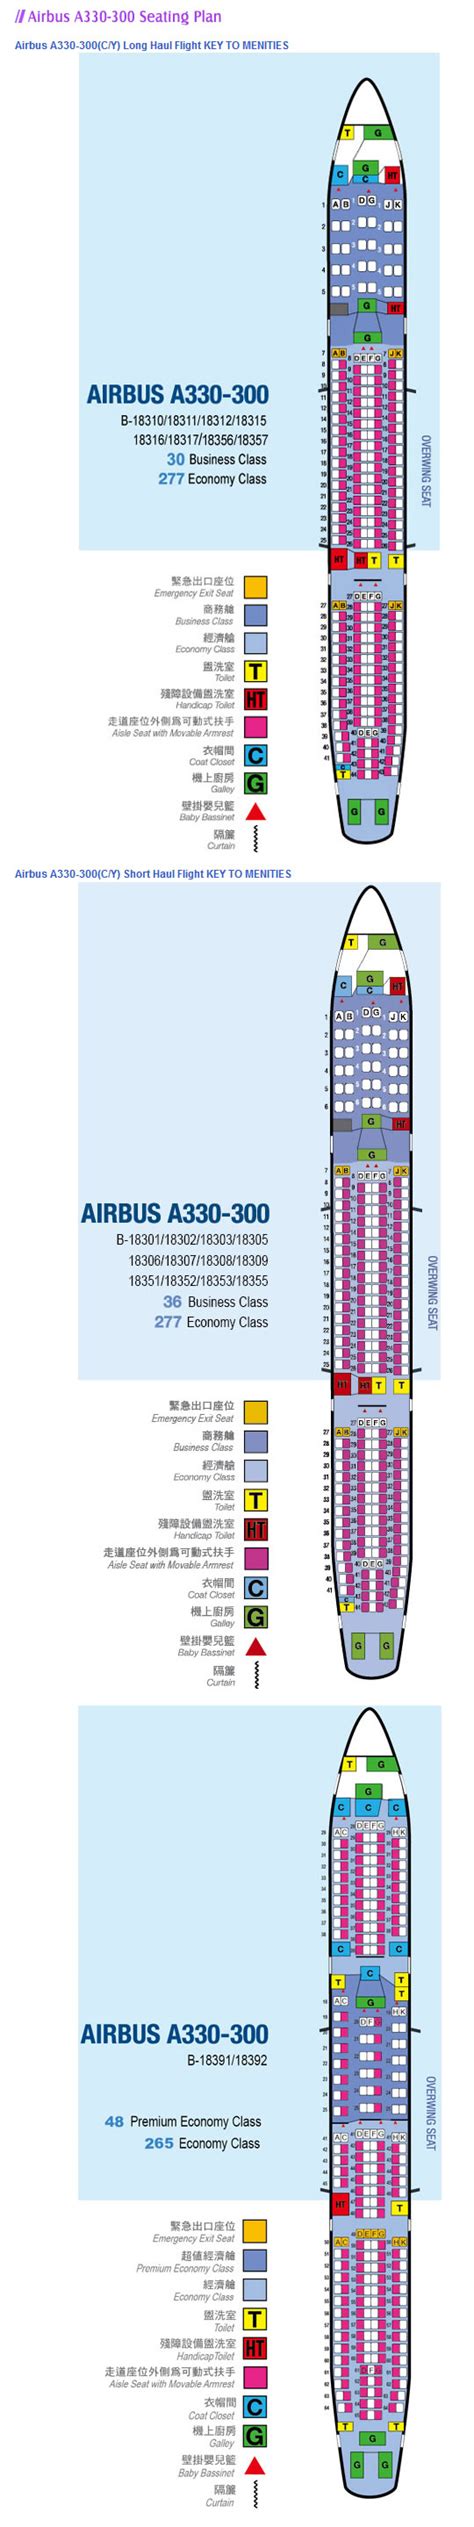 China Airlines Aircraft Seatmaps Airline Seating Maps And Layouts